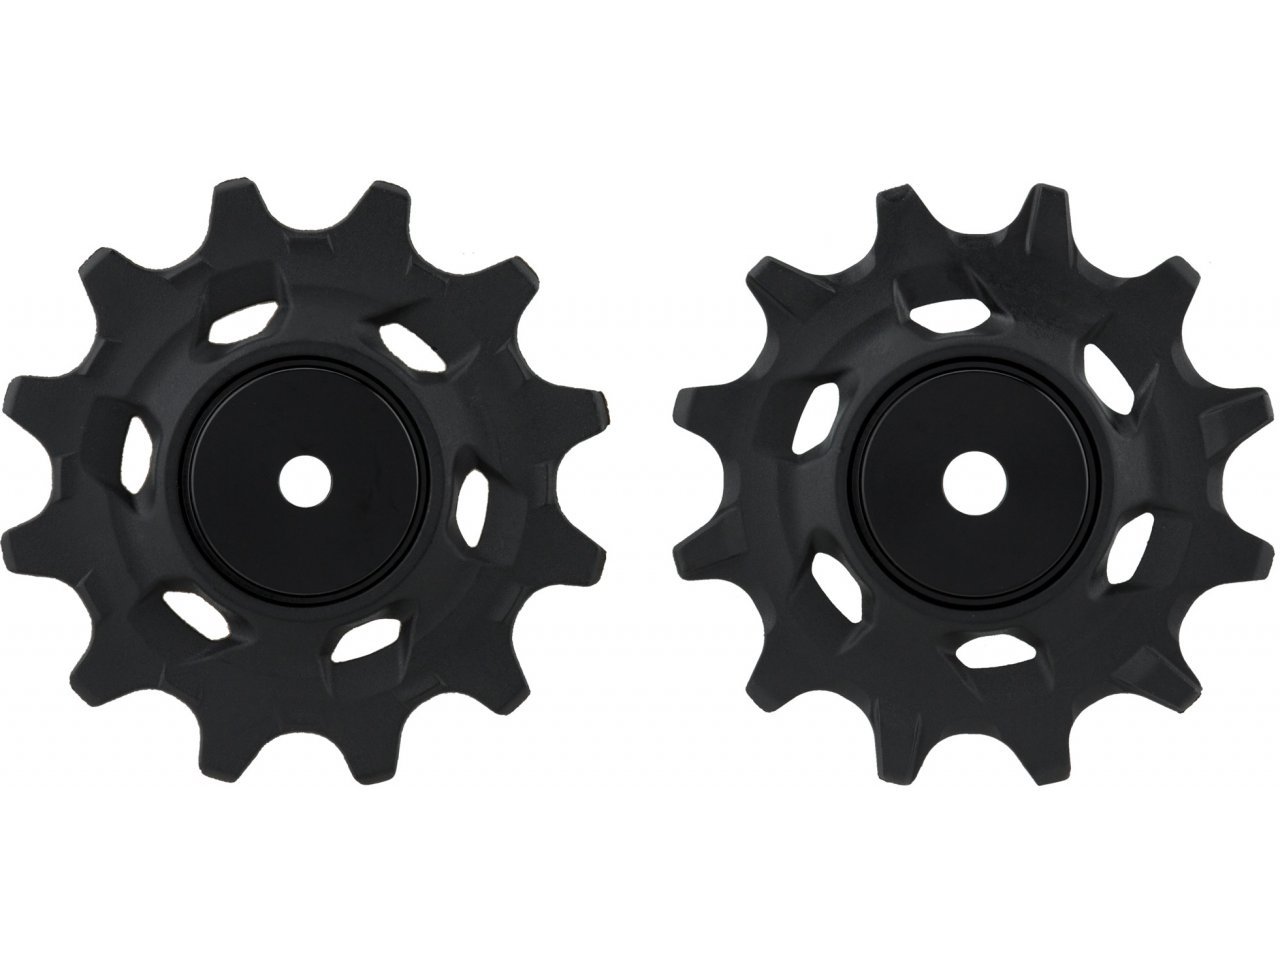 Sram 12 Speed Rear Derailleur Pulley Kit for Force AXS